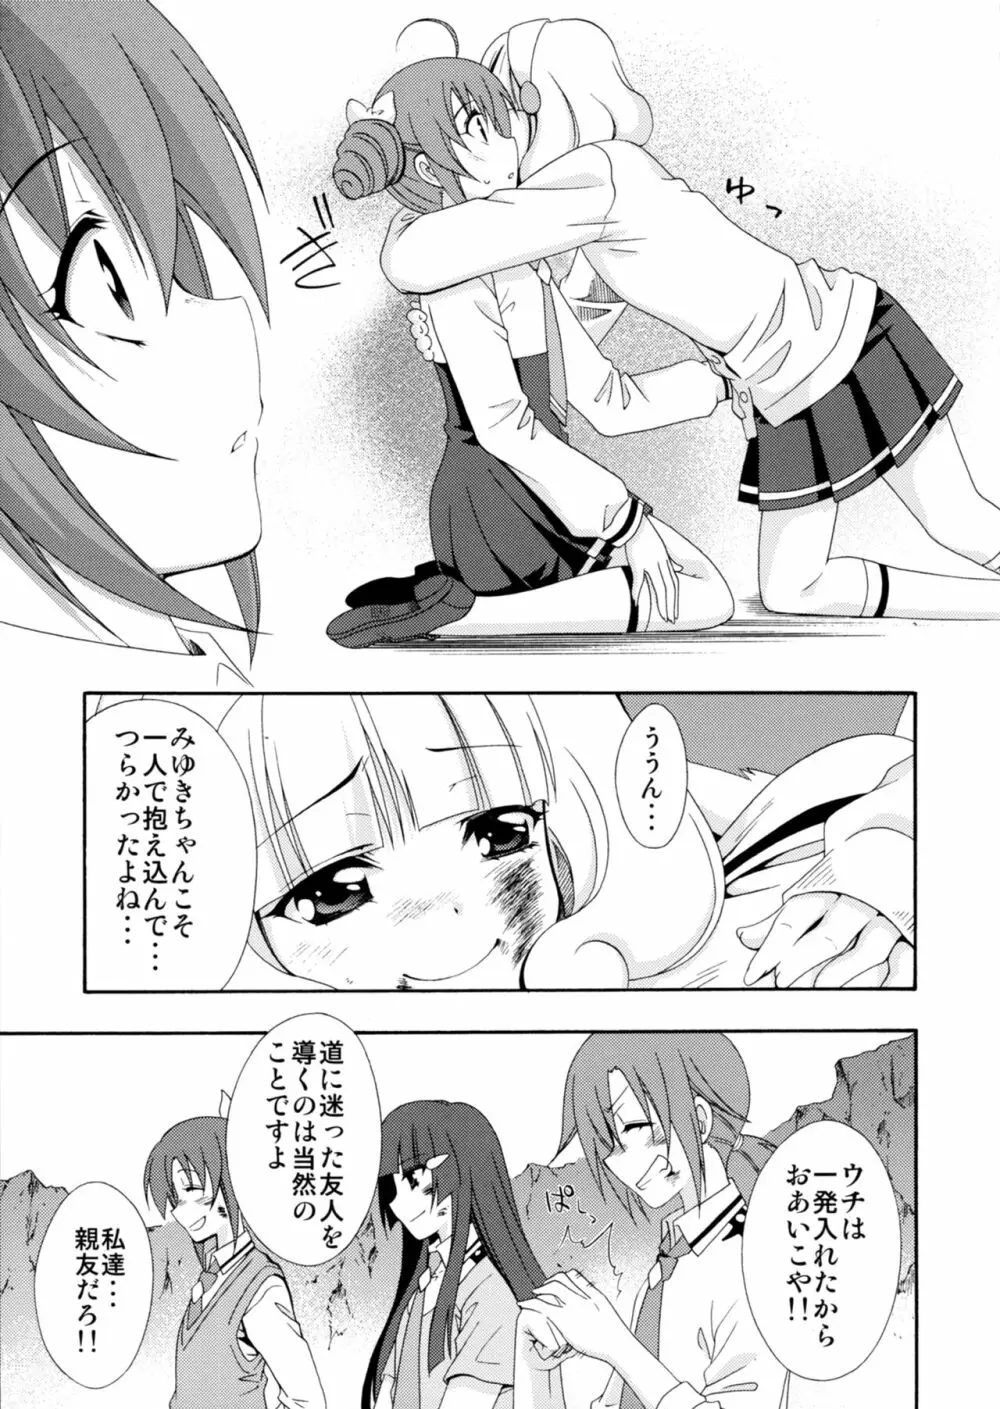 SMILES AND TEARS Vol.02 54ページ